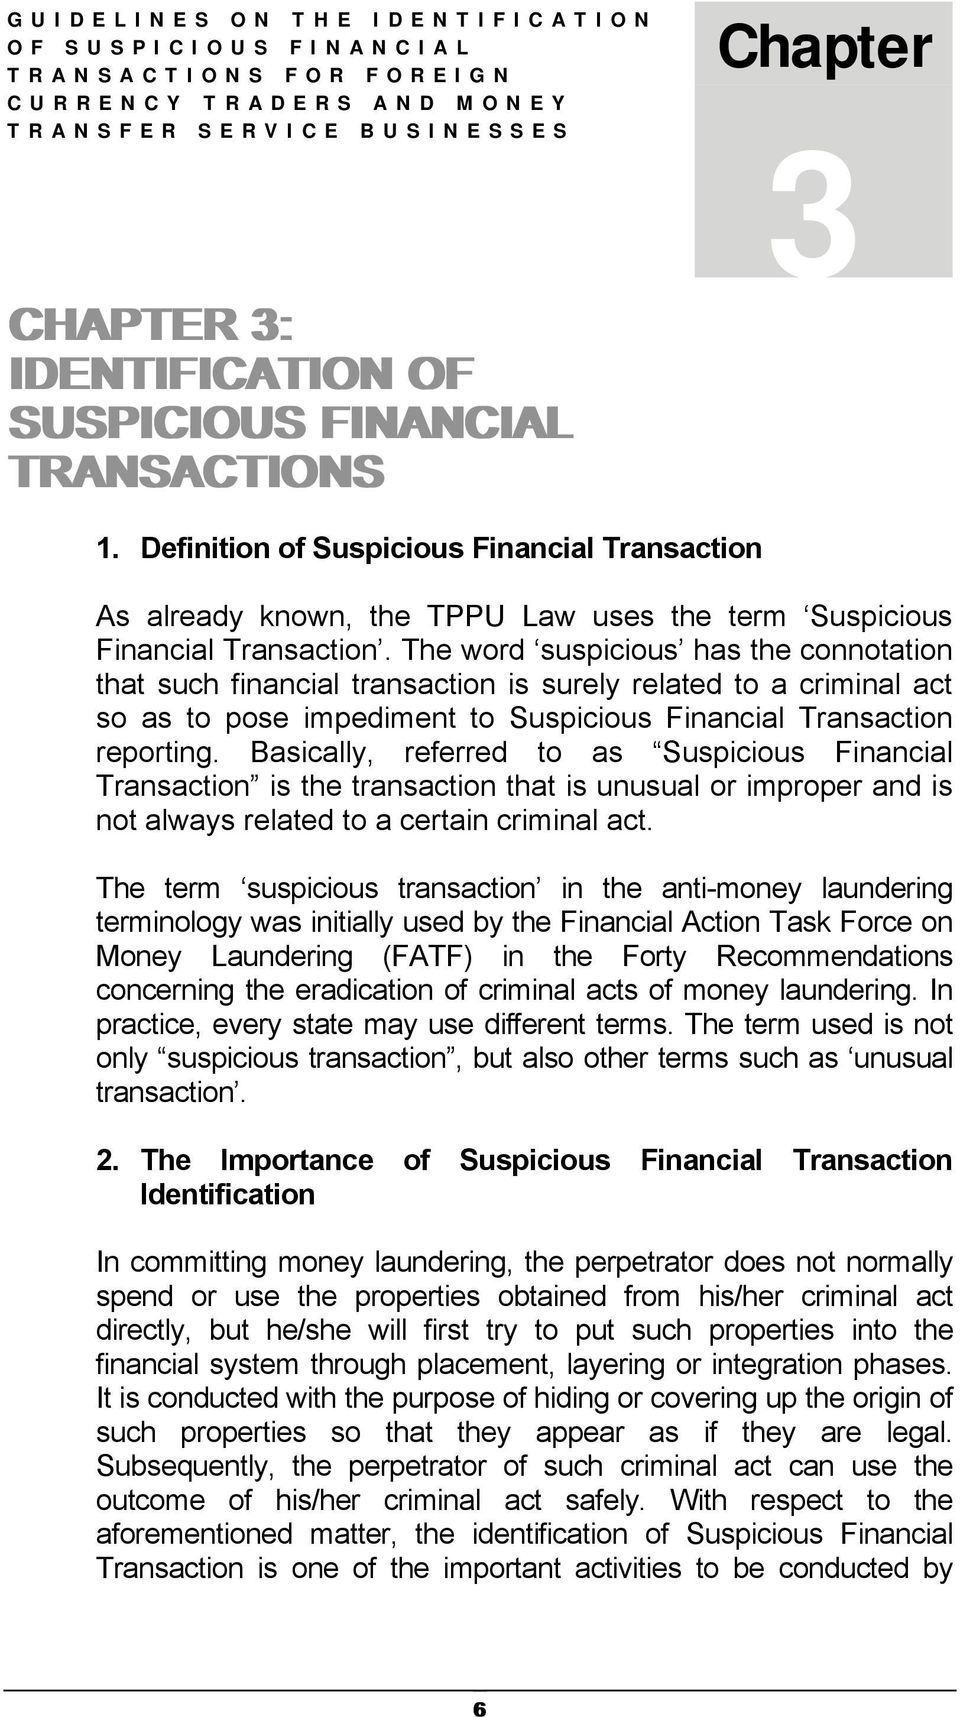 The word suspicious has the connotation that such financial transaction is surely related to a criminal act so as to pose impediment to Suspicious Financial Transaction reporting.